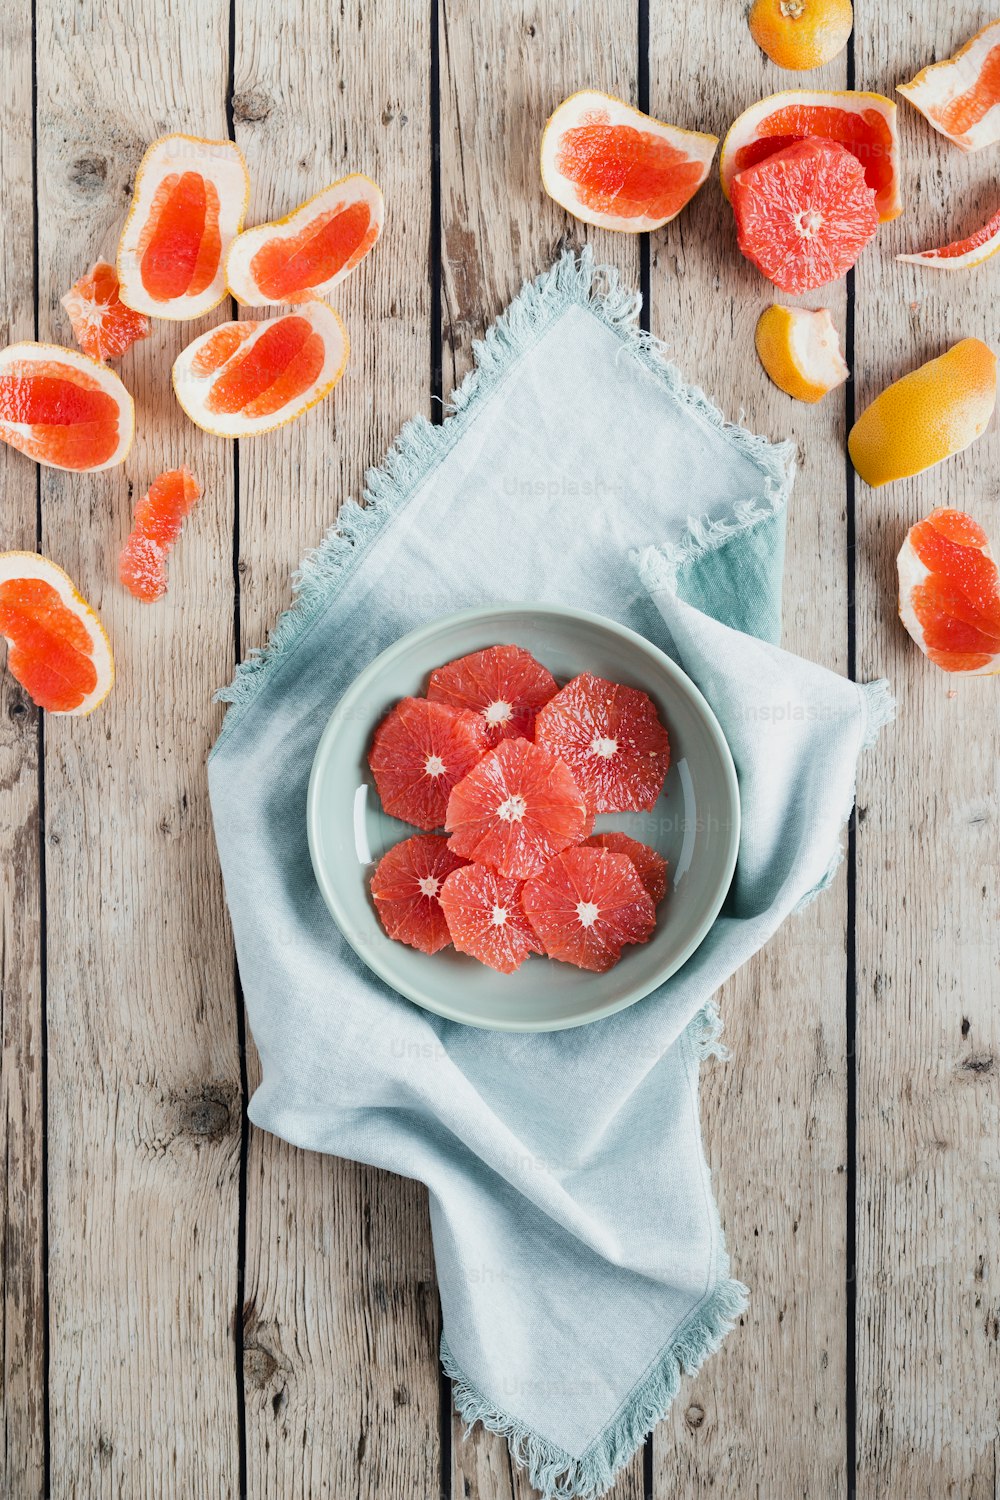 a plate of sliced grapefruits on a wooden table